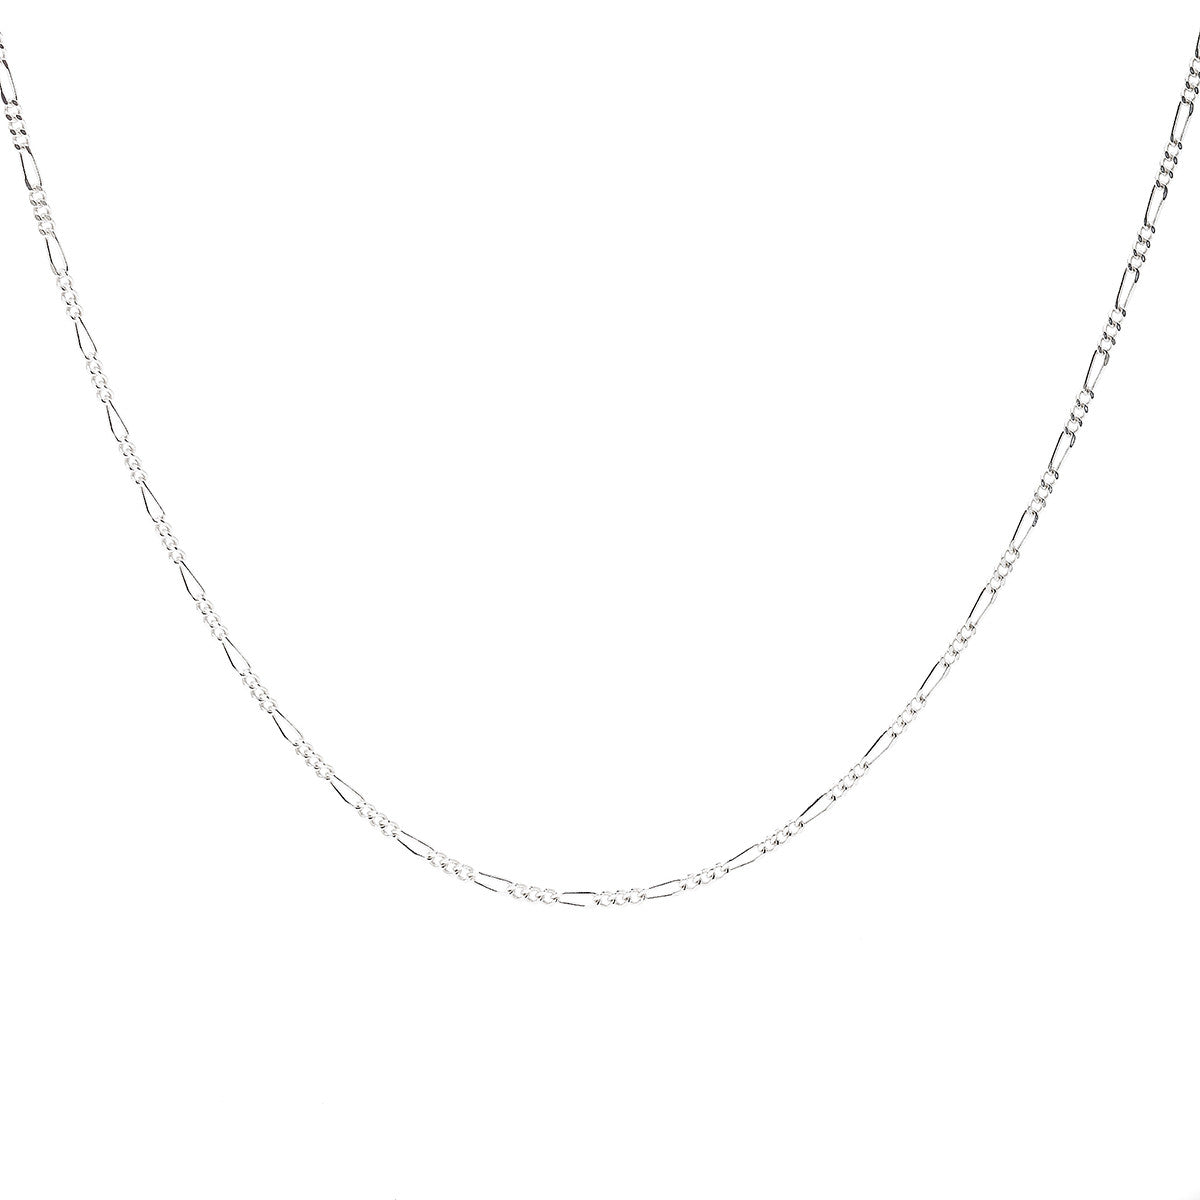 1.8MM Sterling Silver Figaro Chain For Men and Women. Perfect for pendants. Lobster claw clasp.